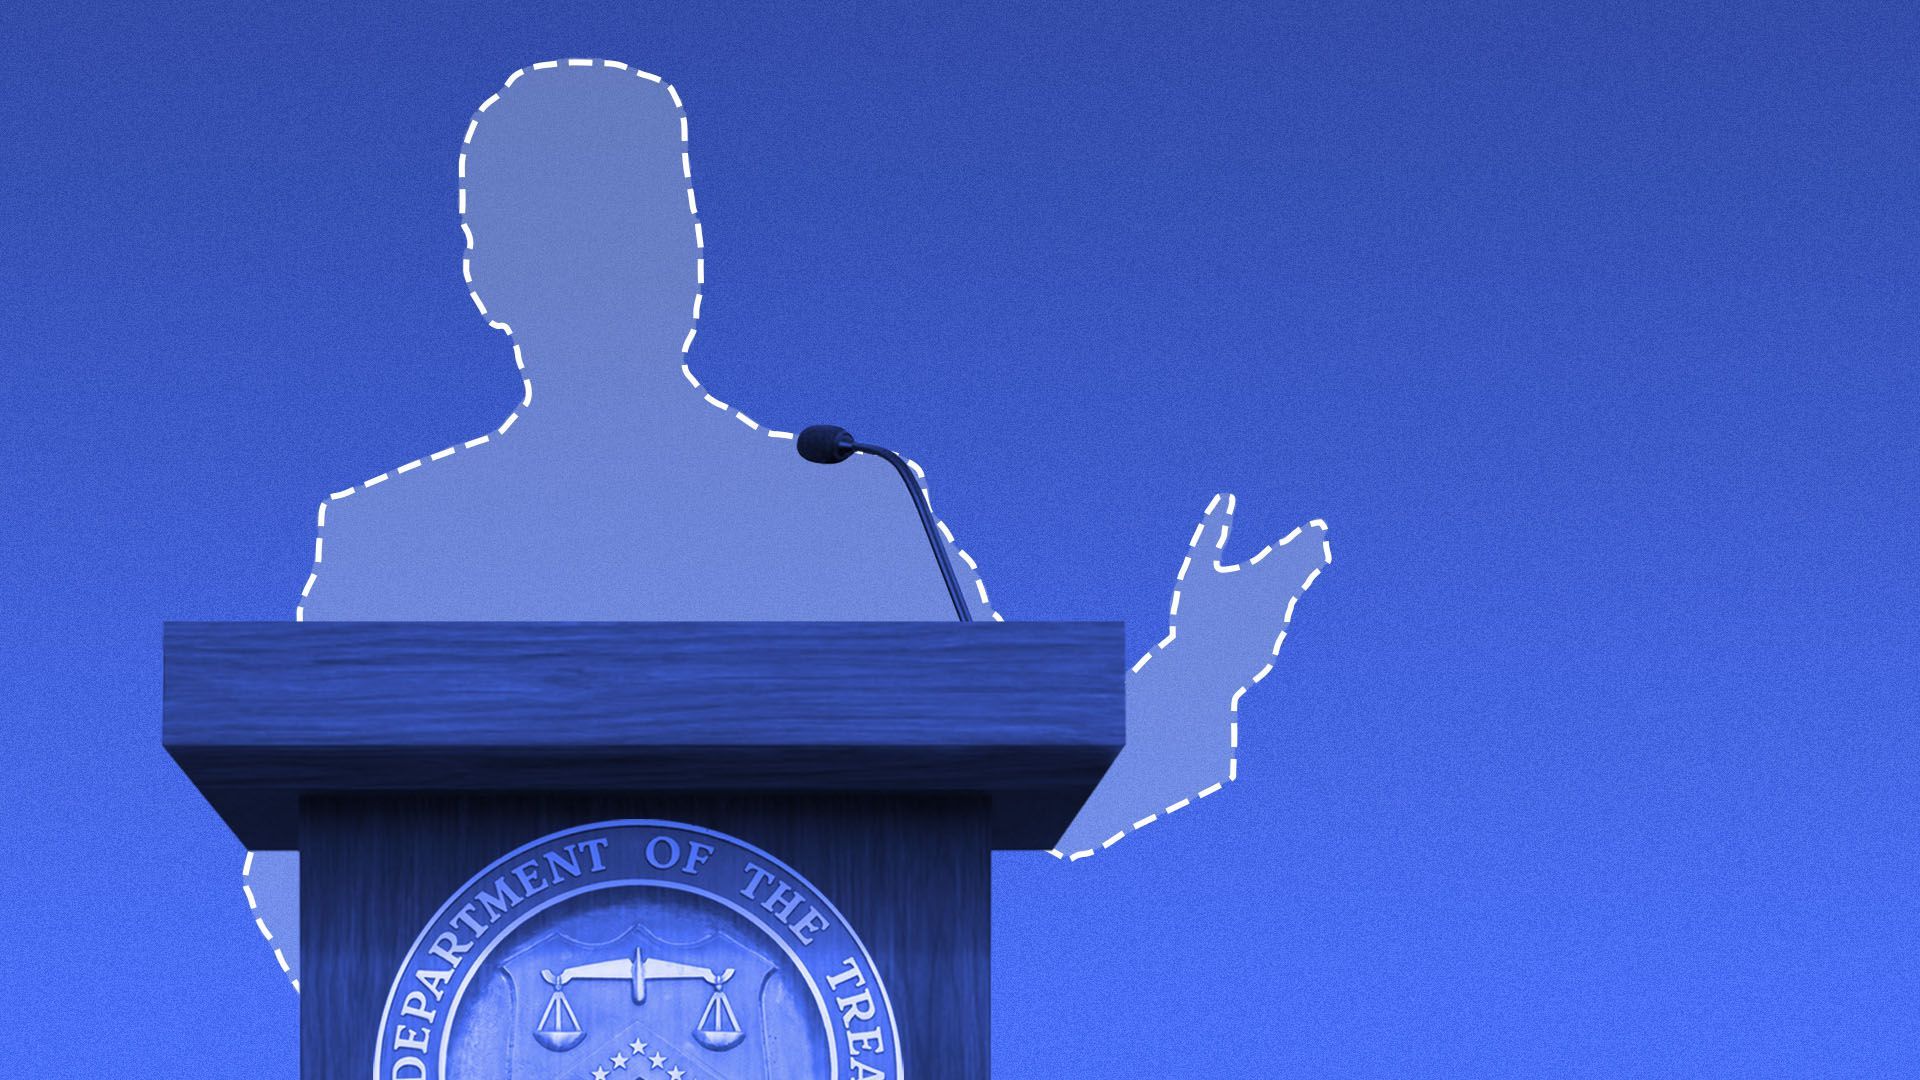 Illustration of an anonymous person standing behind a podium with the Department of Treasury seal on the front